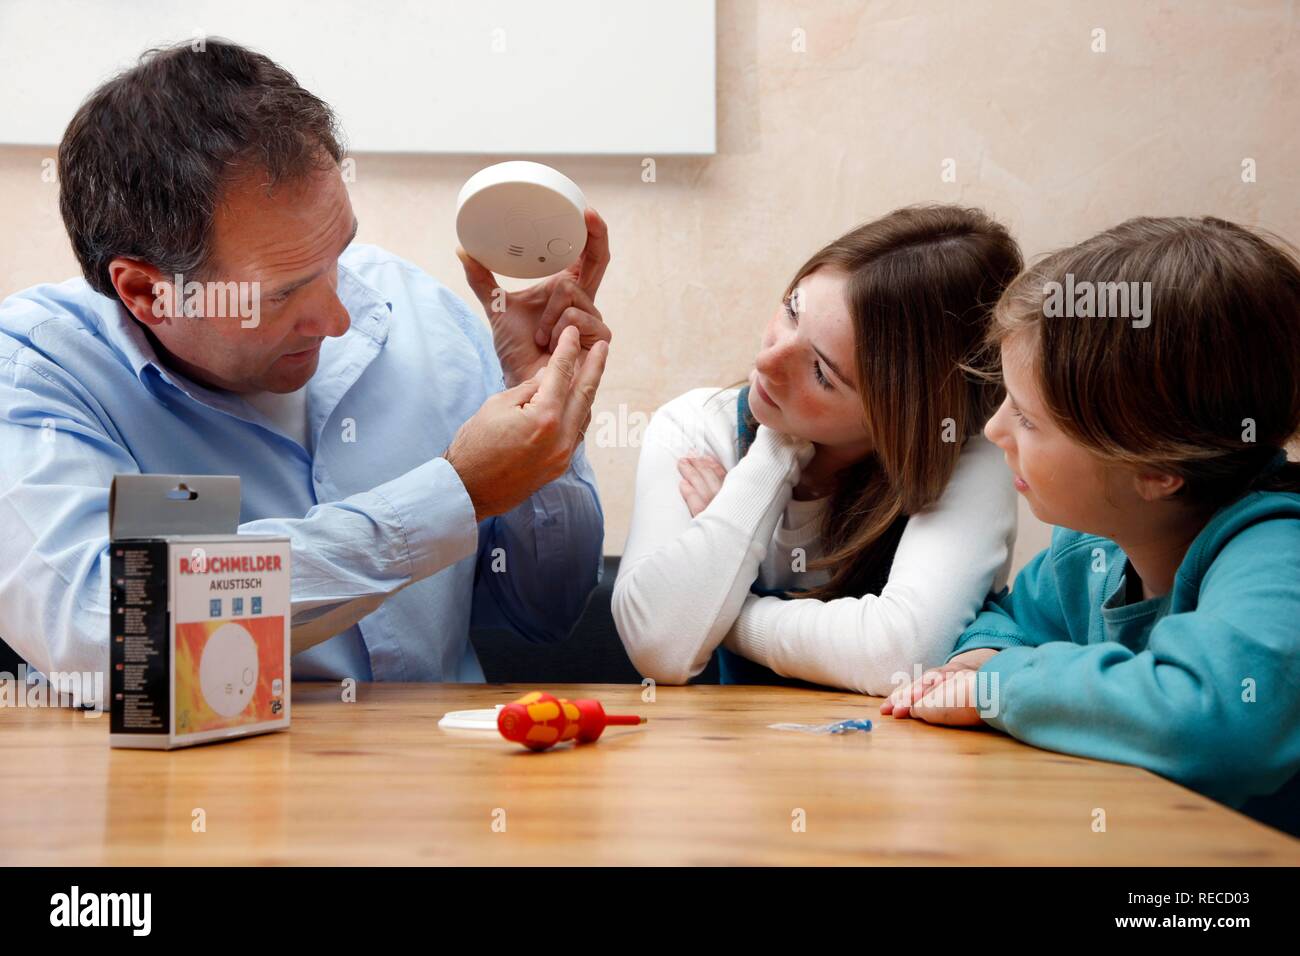 A father explaining the significance and function of a smoke detector in a private home to his daughters Stock Photo